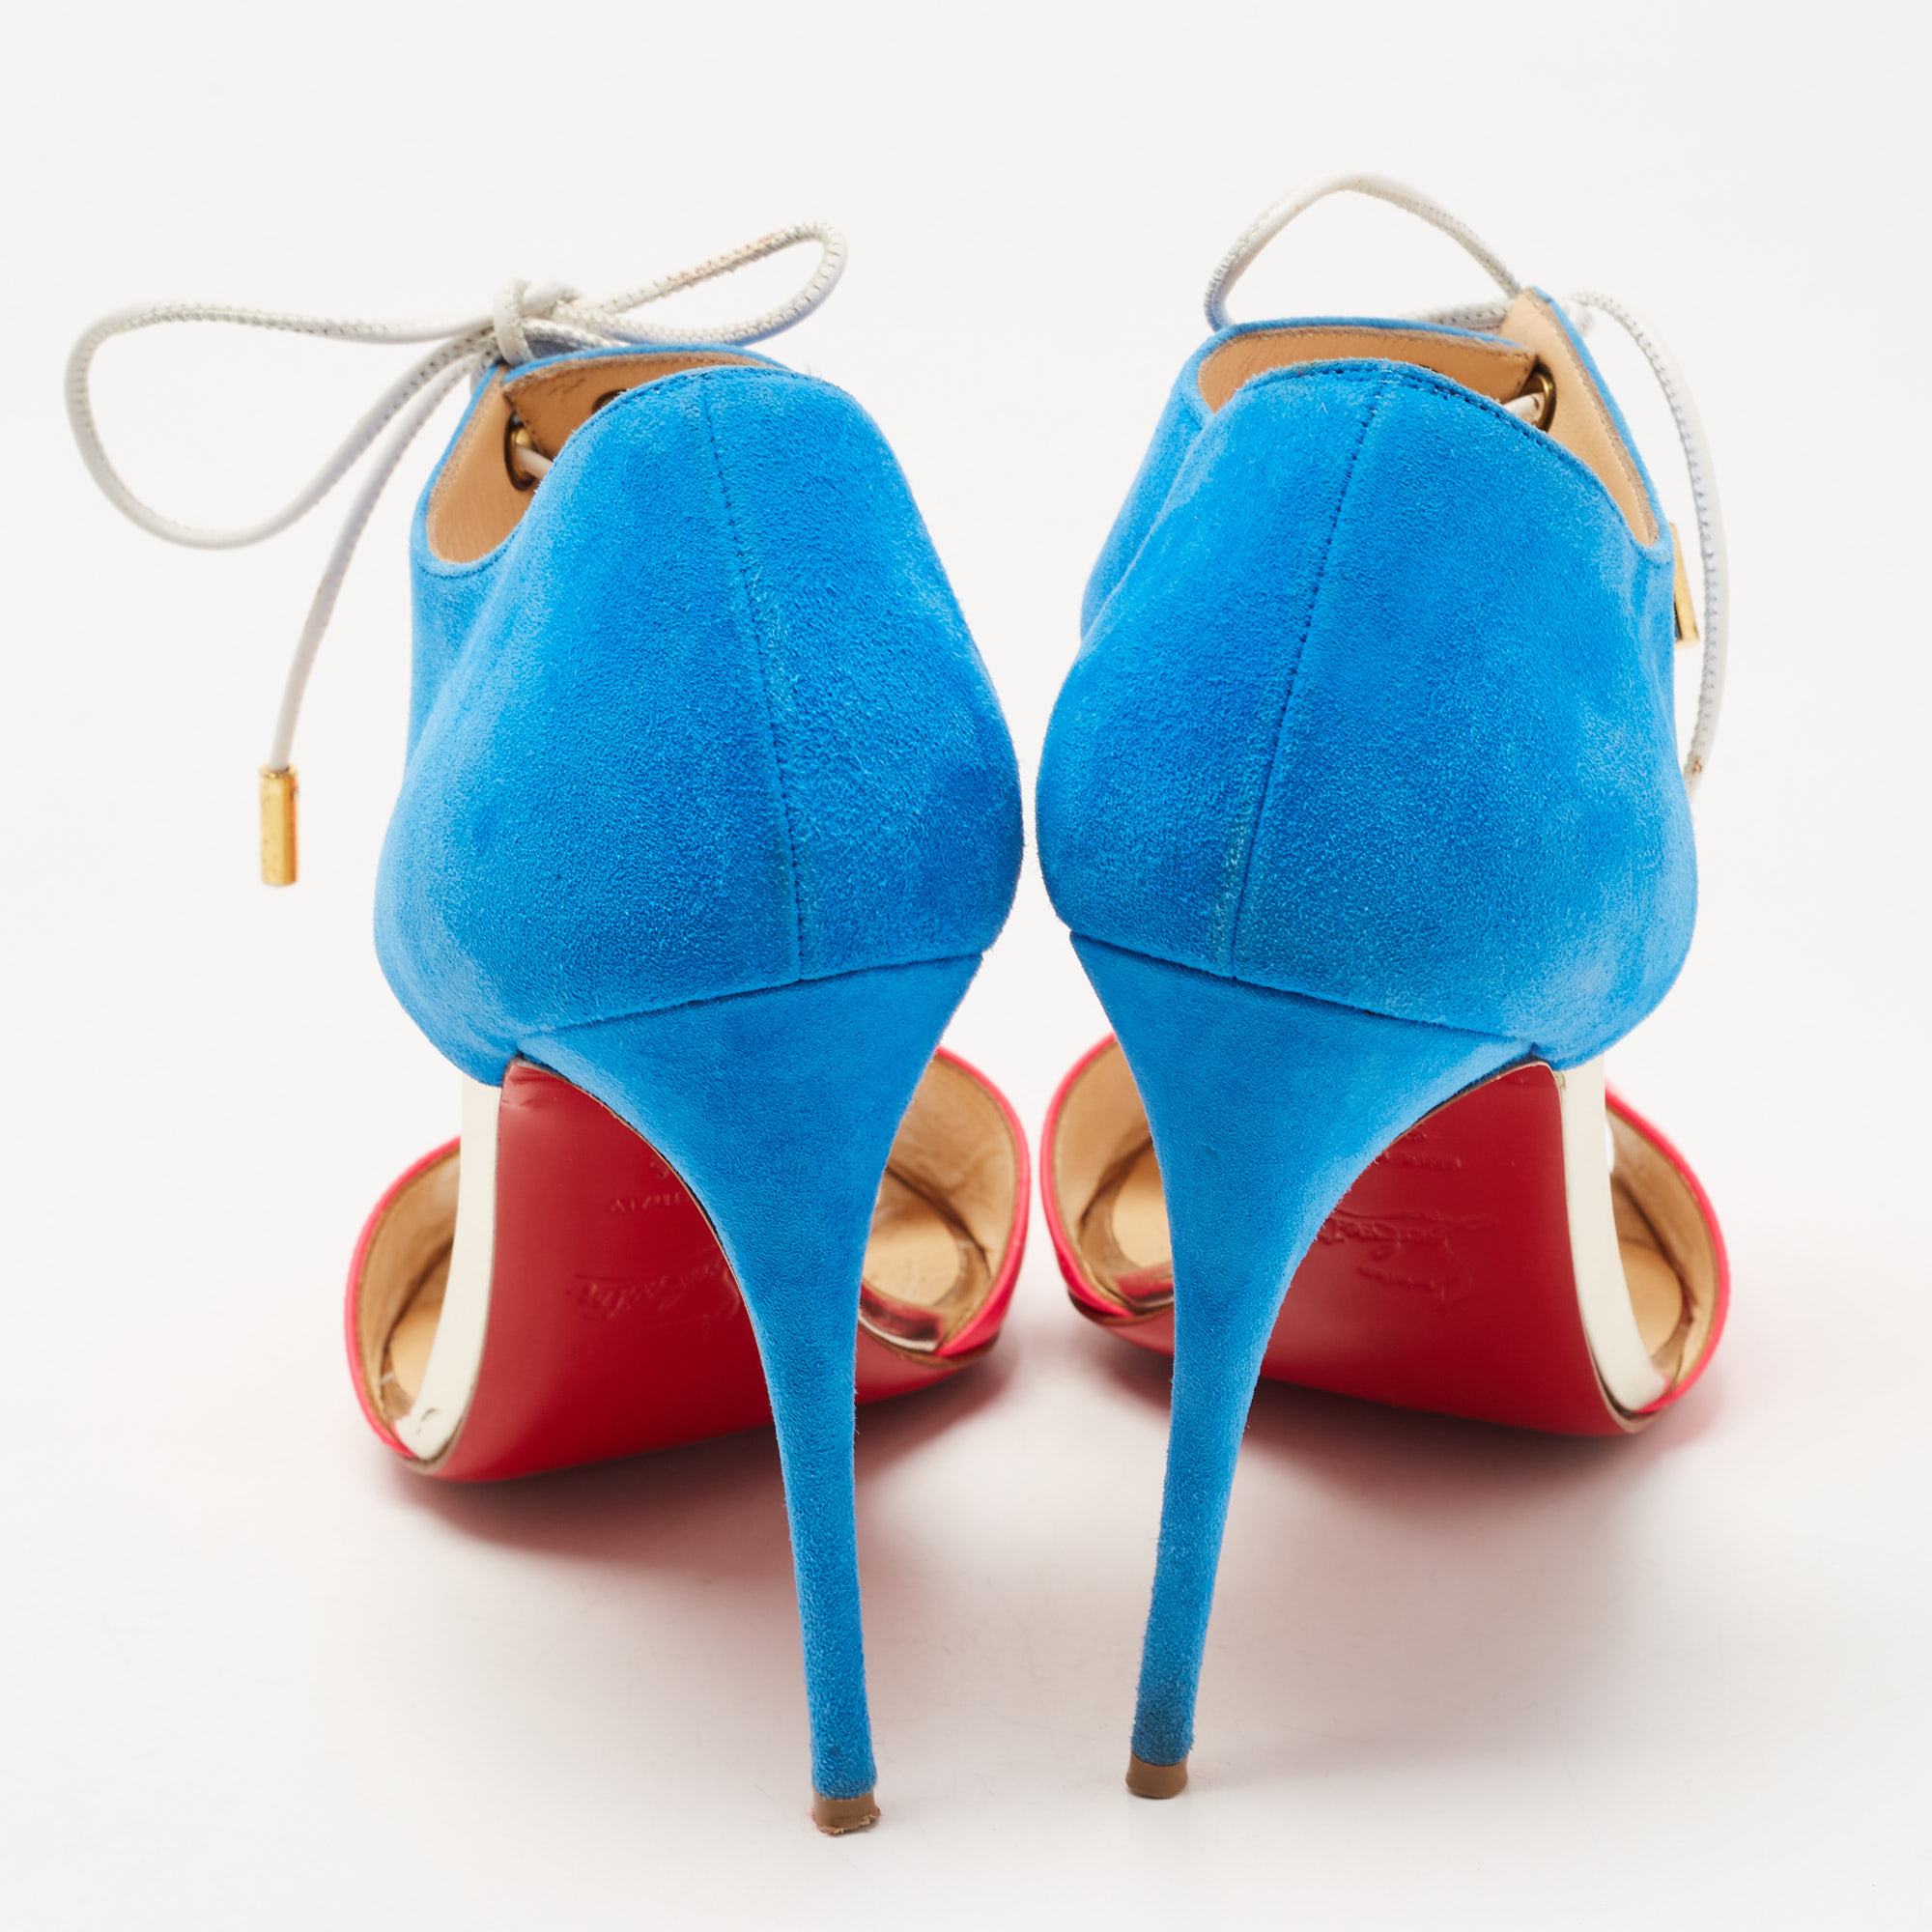 Christian Louboutin Pink/Blue Leather And Suede Mayerling Sandals Size 38.5